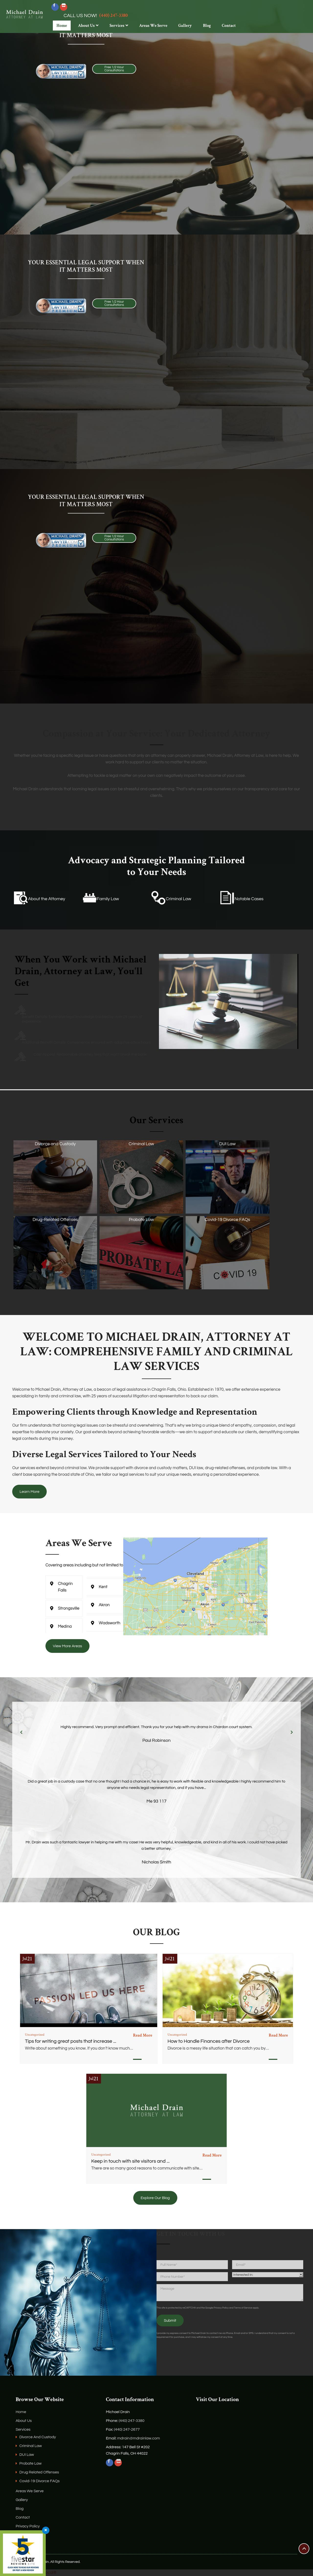 Michael Drain, Attorney at Law - Chagrin Falls OH Lawyers